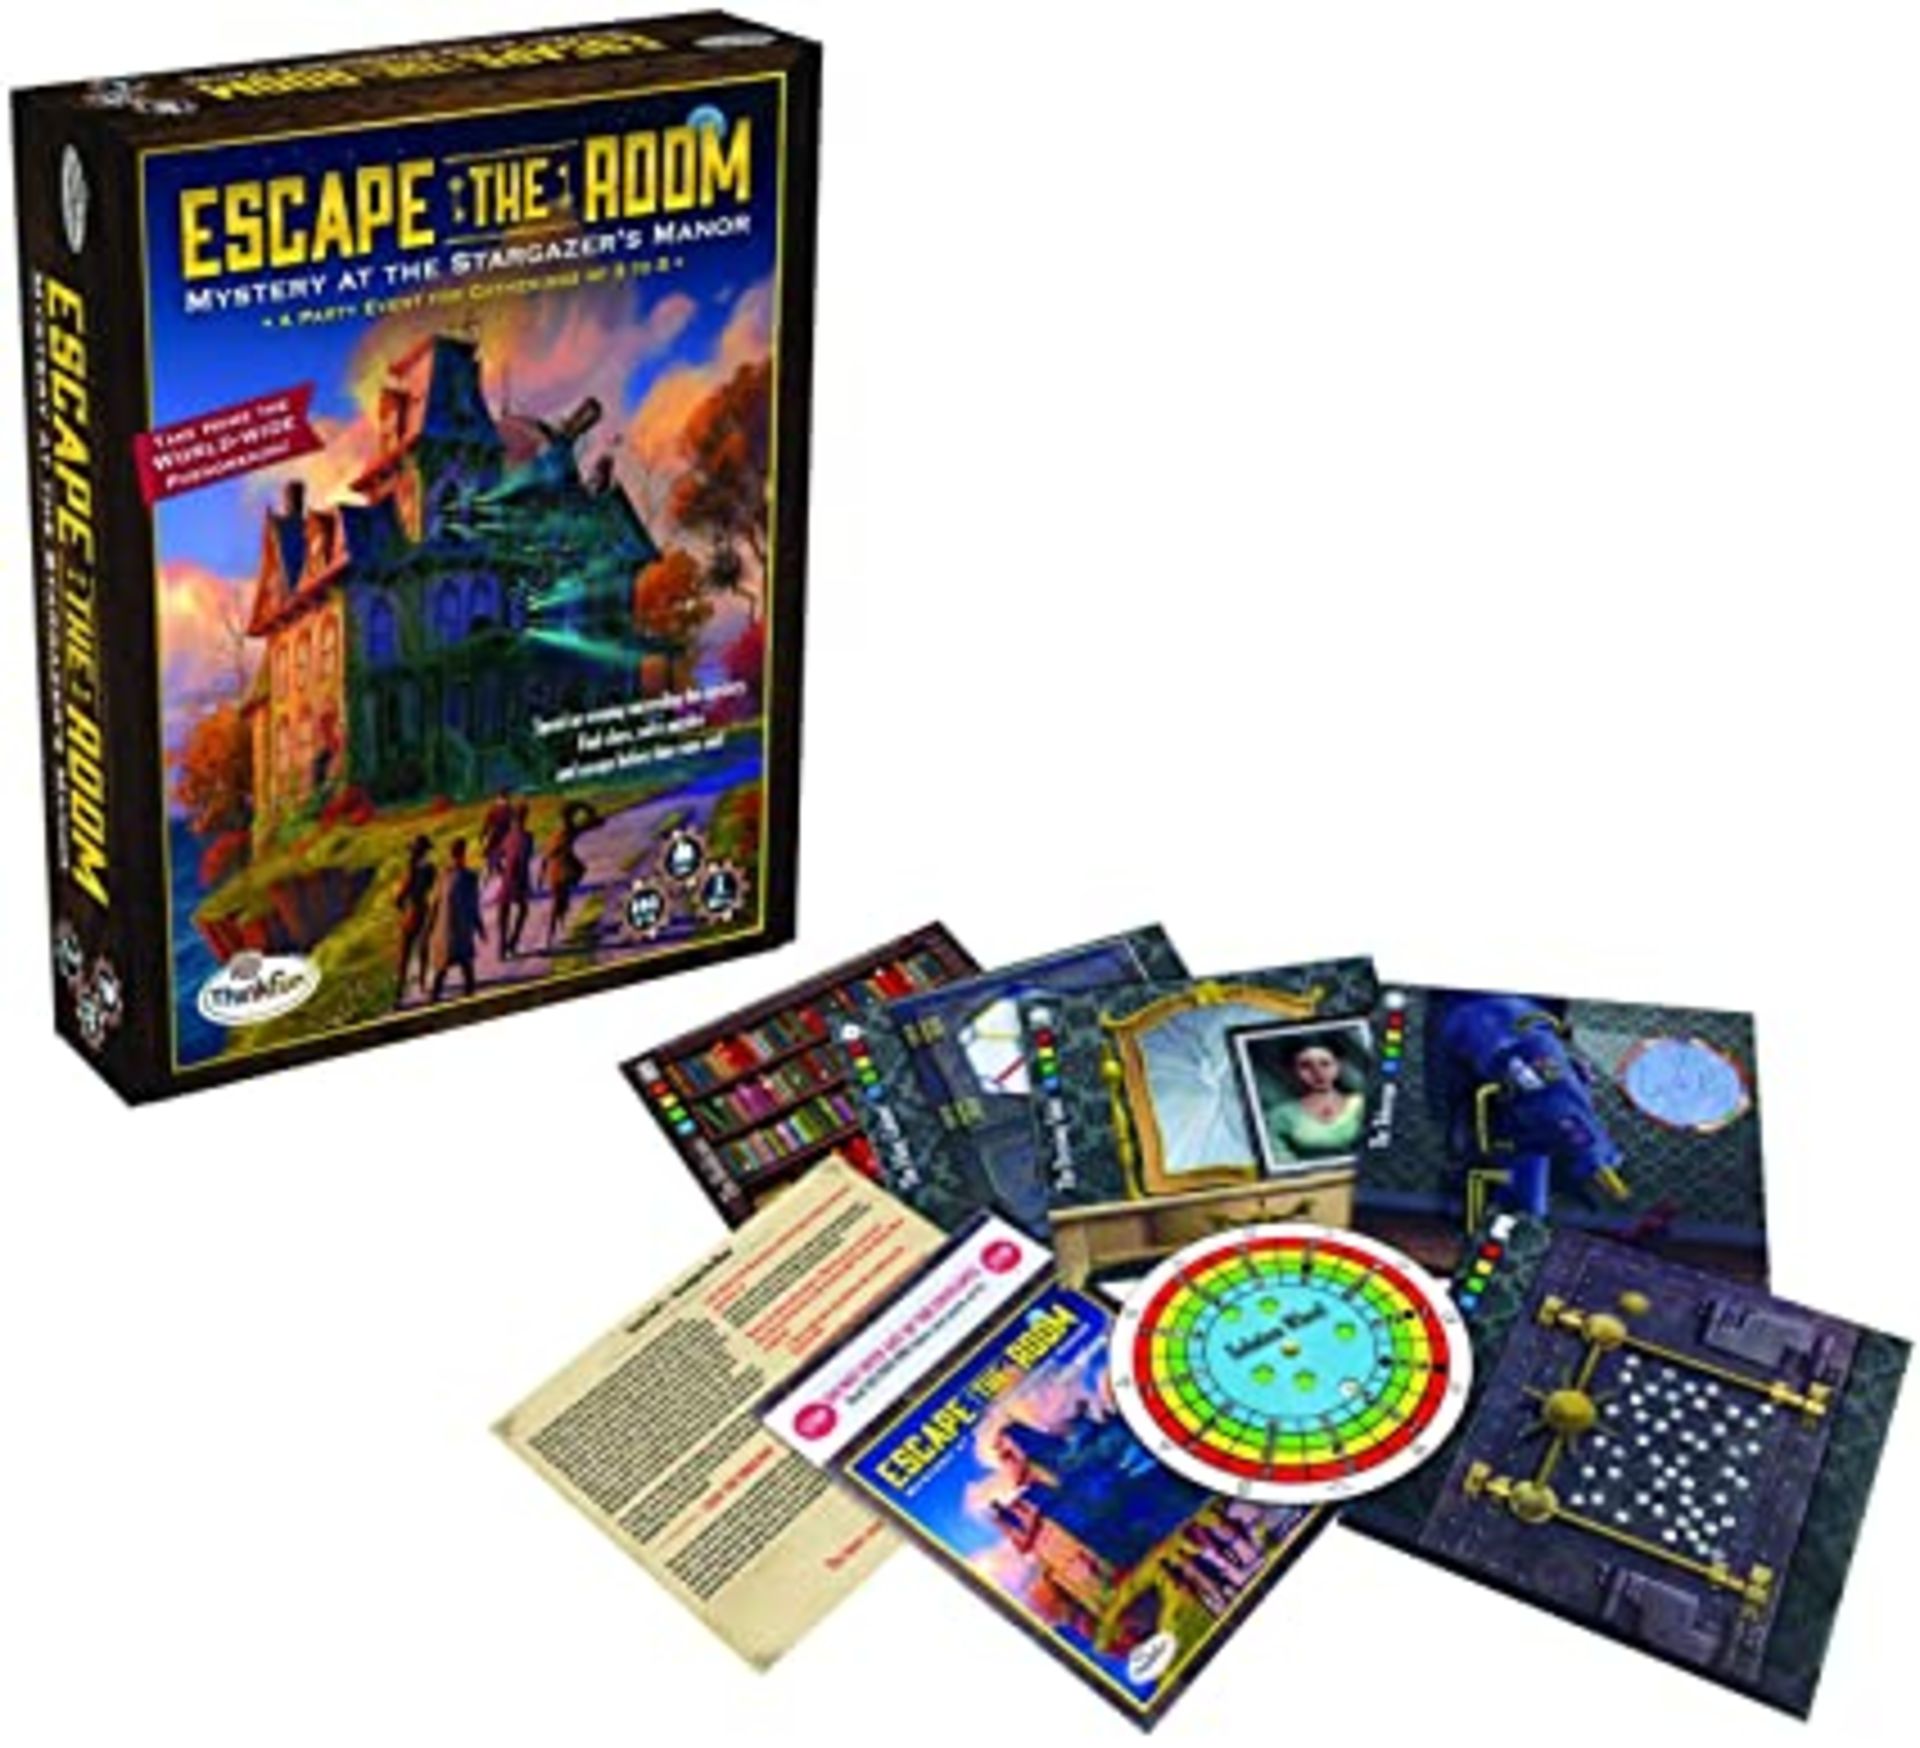 RRP - £17.00 Thinkfun Mystery at The Stargazers Manor - Escape Room Game for Adults and Kids Age 13